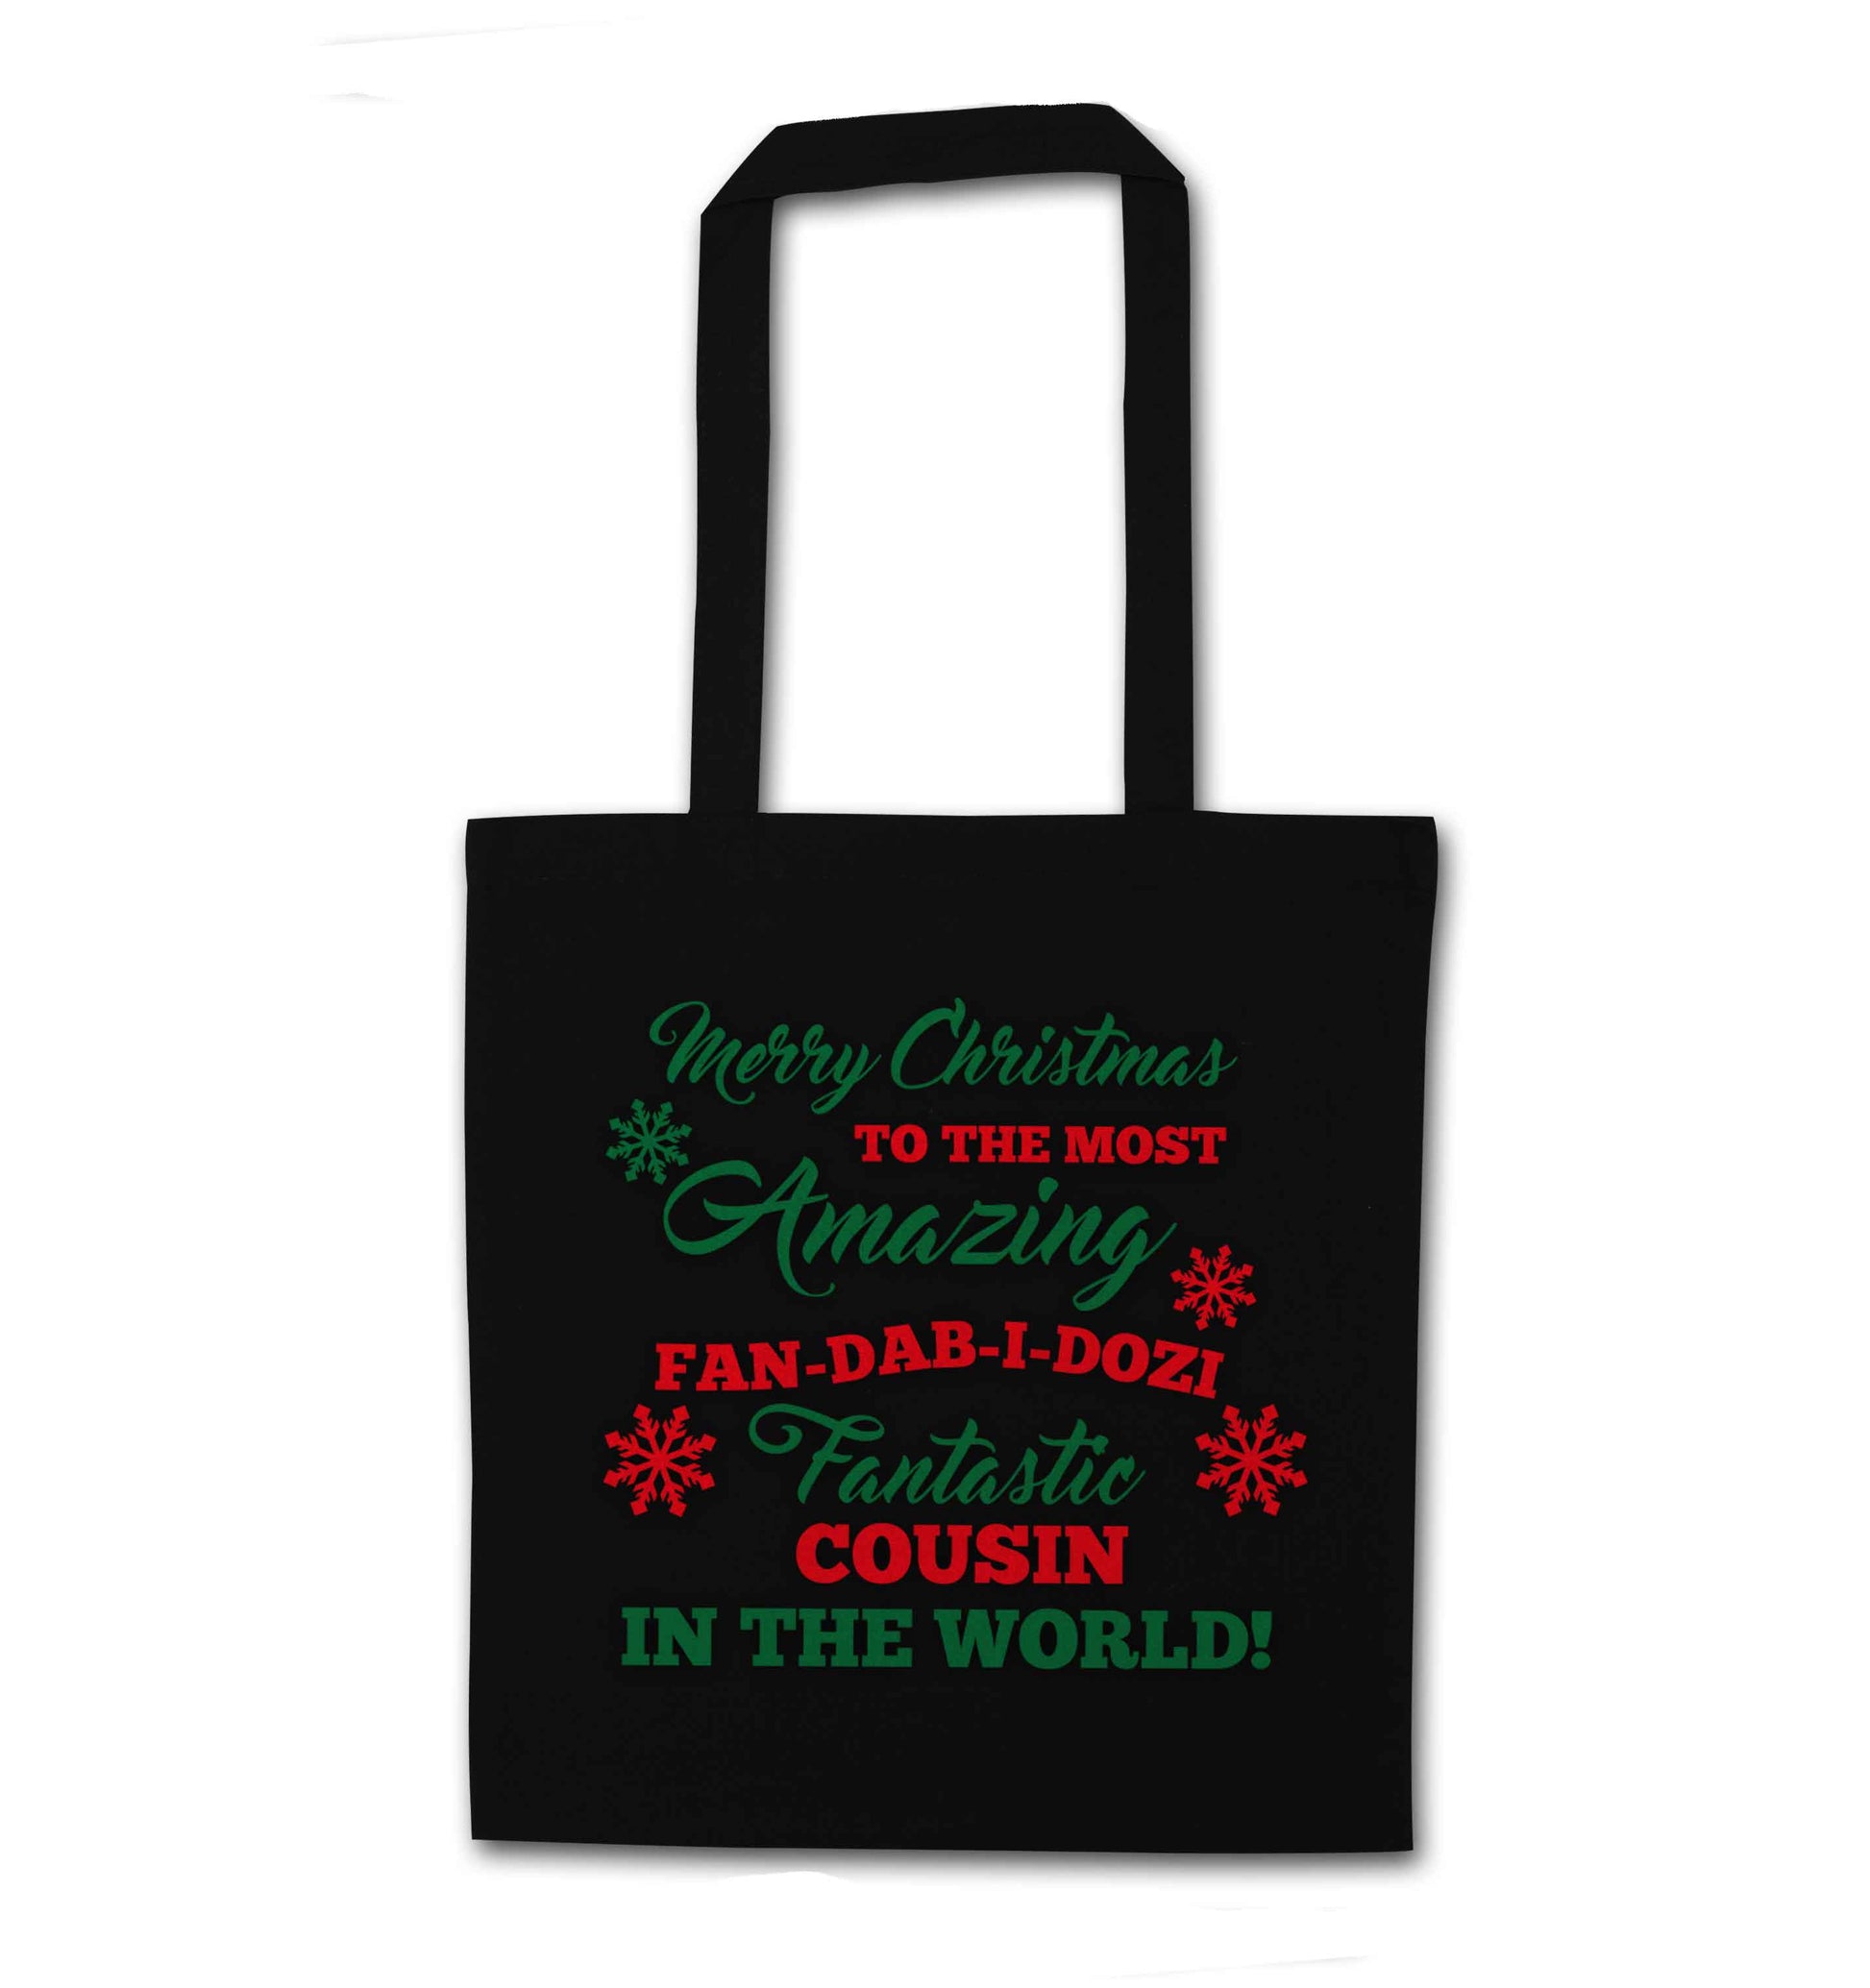 Merry Christmas to the most amazing fan-dab-i-dozi fantasic Cousin in the world black tote bag